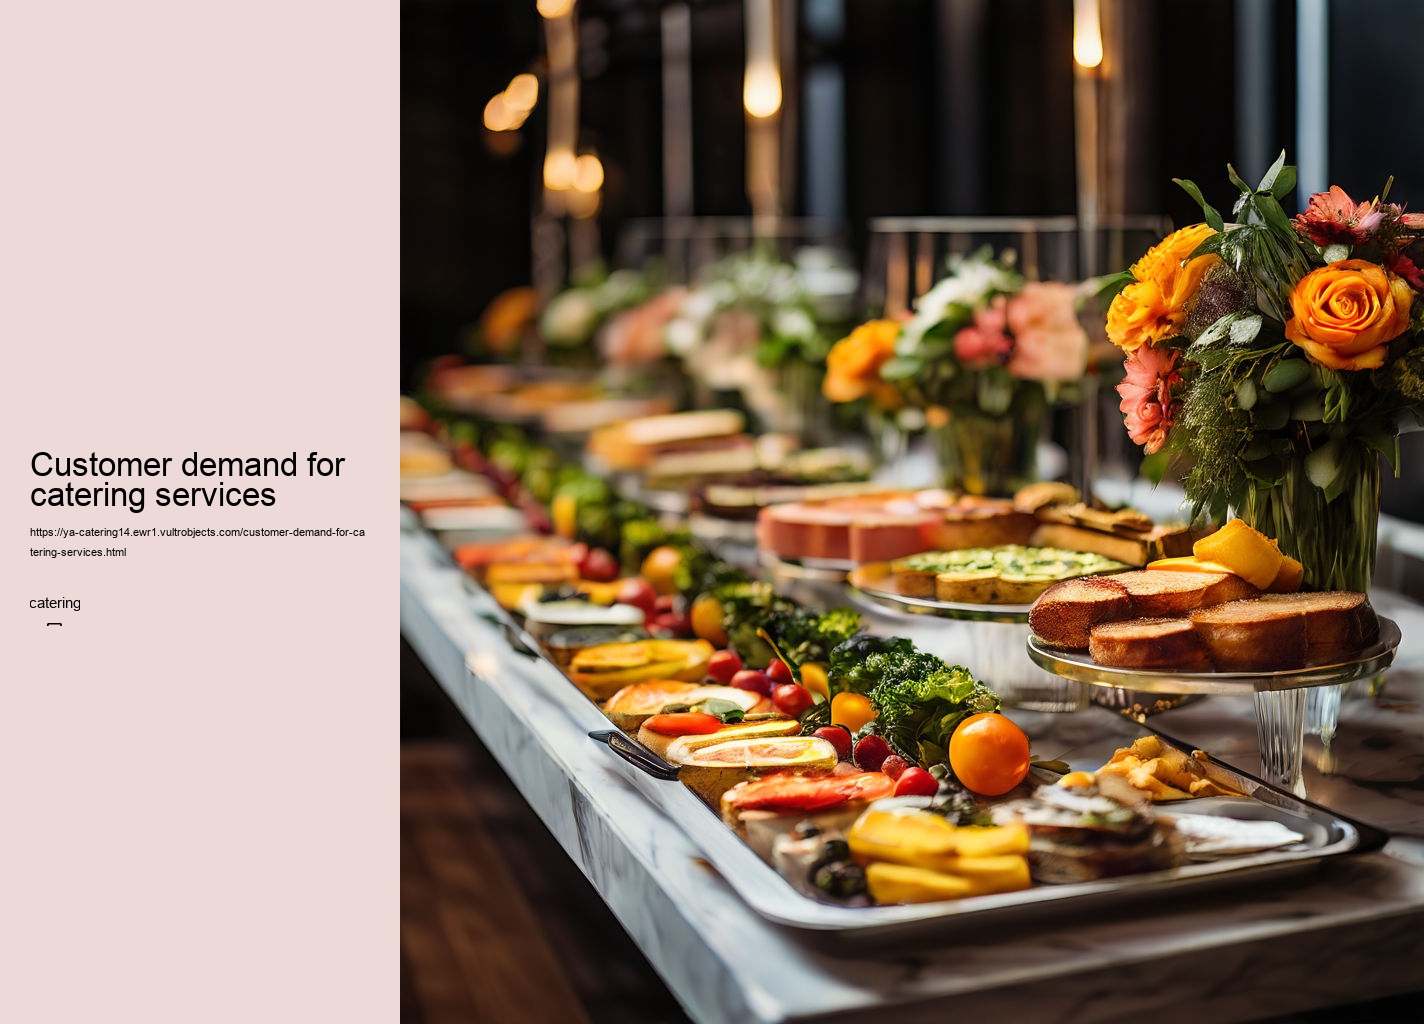 Customer demand for catering services